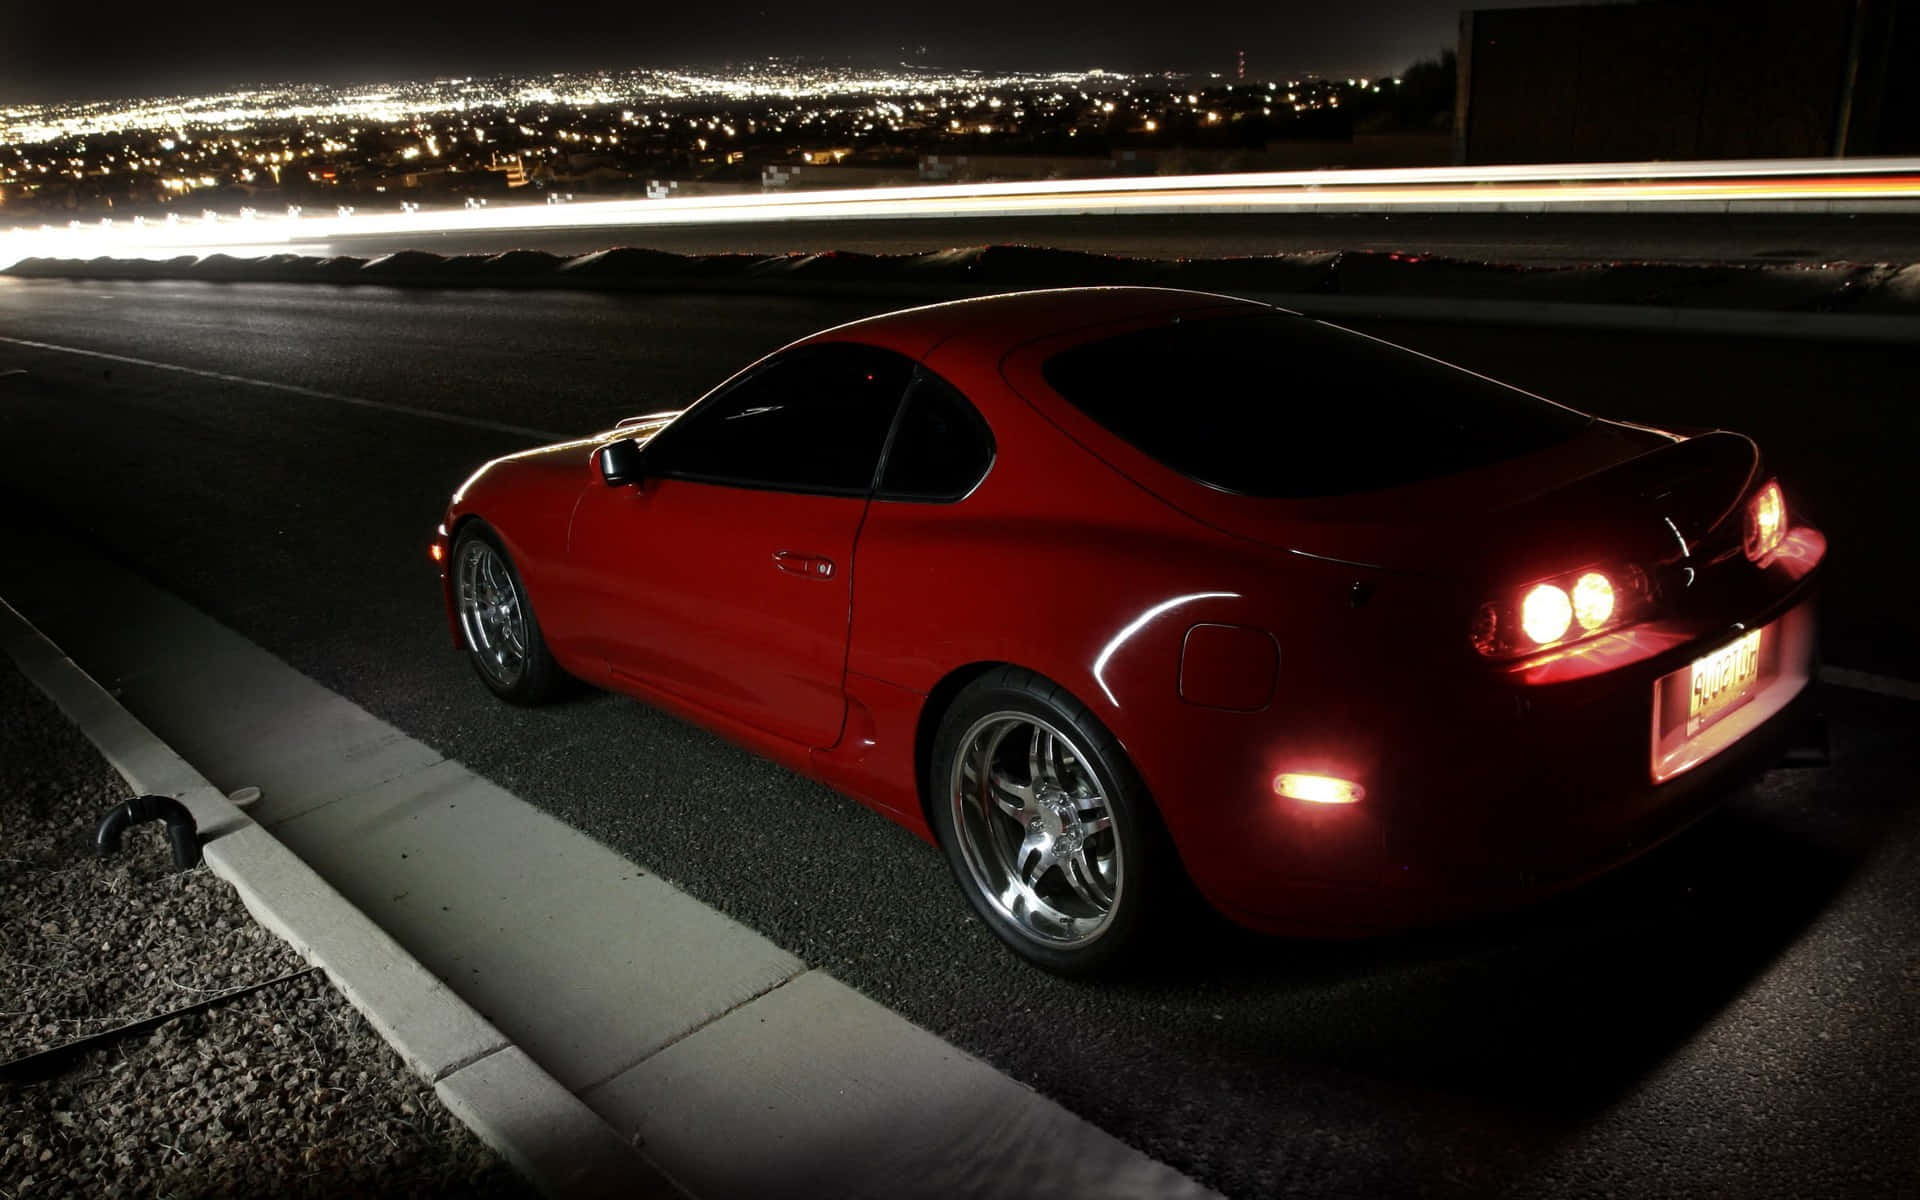 Red Sports Car Nighttime Cityscape Wallpaper